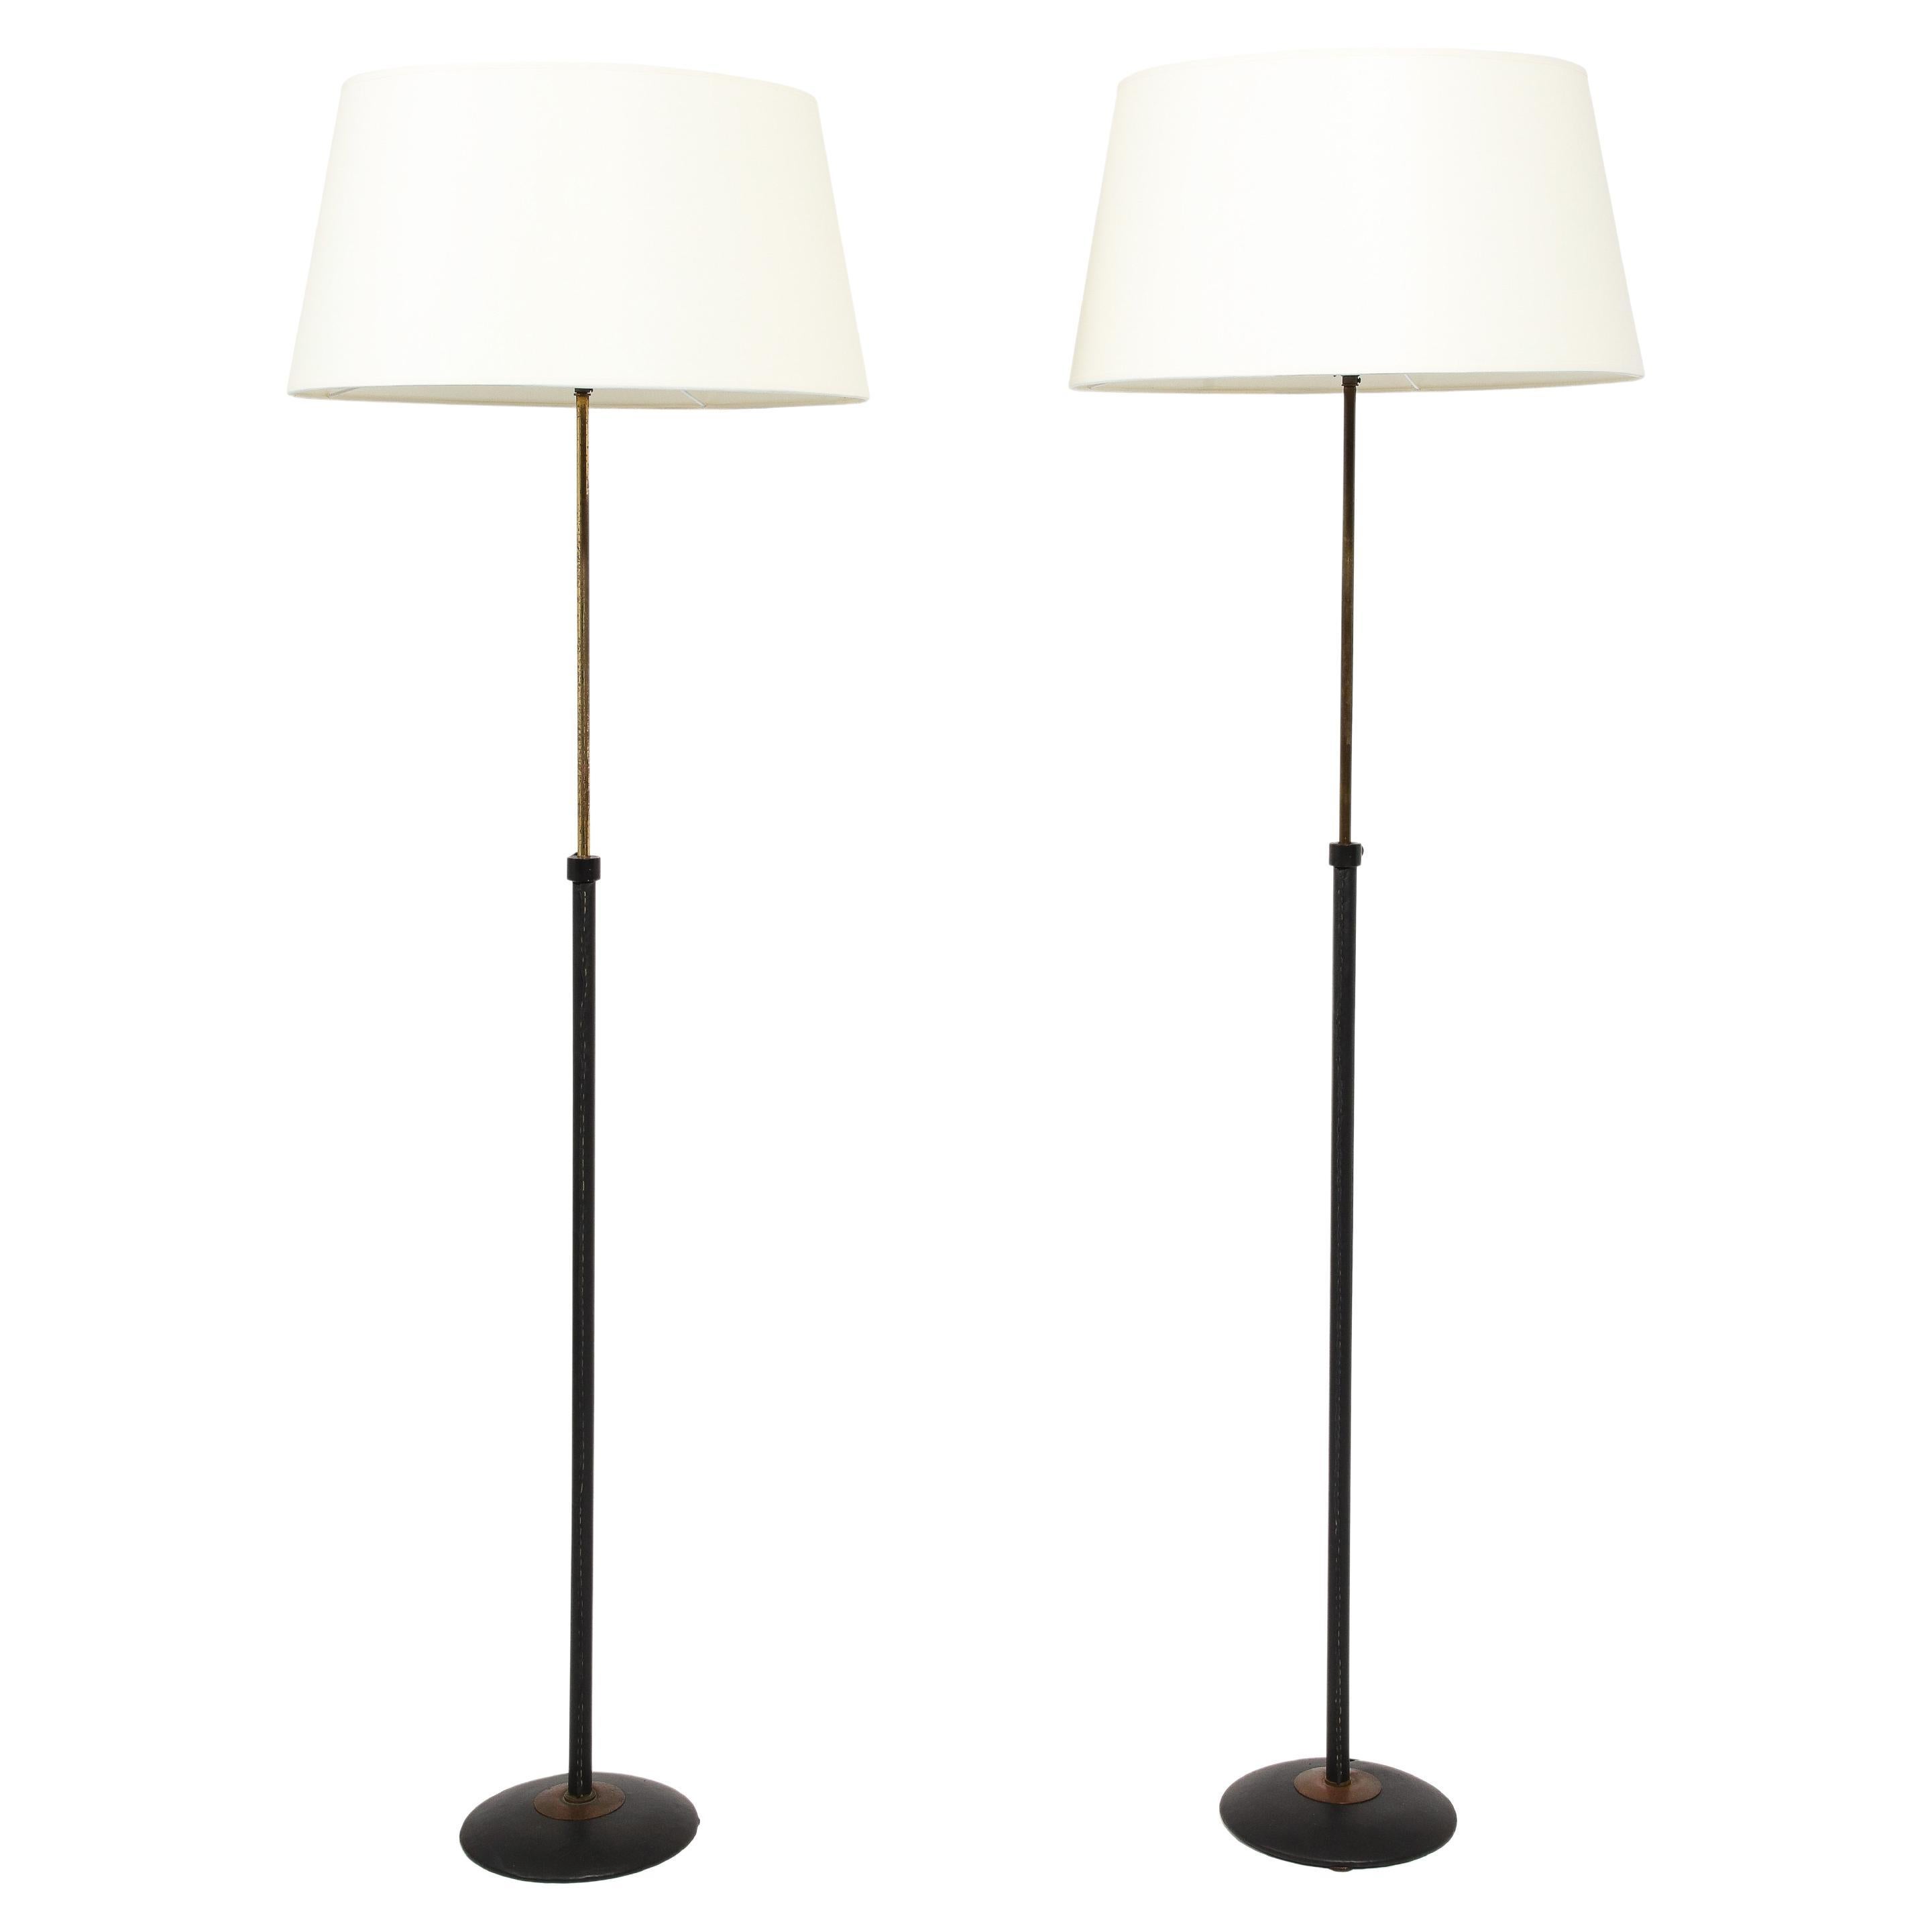 Adnet Style Brass & Black Leather Wrapped Adjustable Floor Lamps, France 1960's